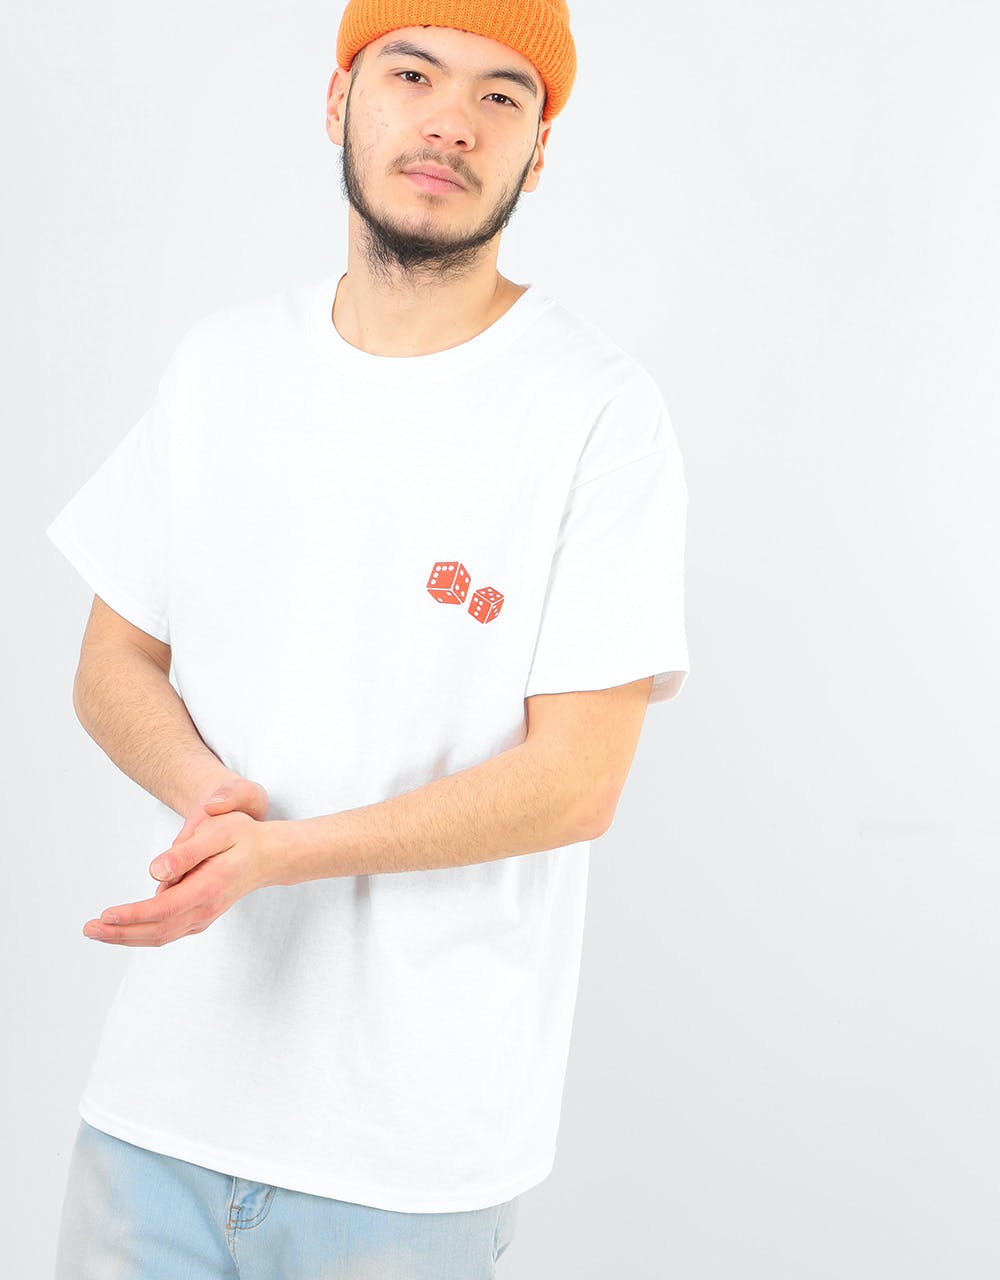 Route One Better Luck Next Time T-Shirt - White